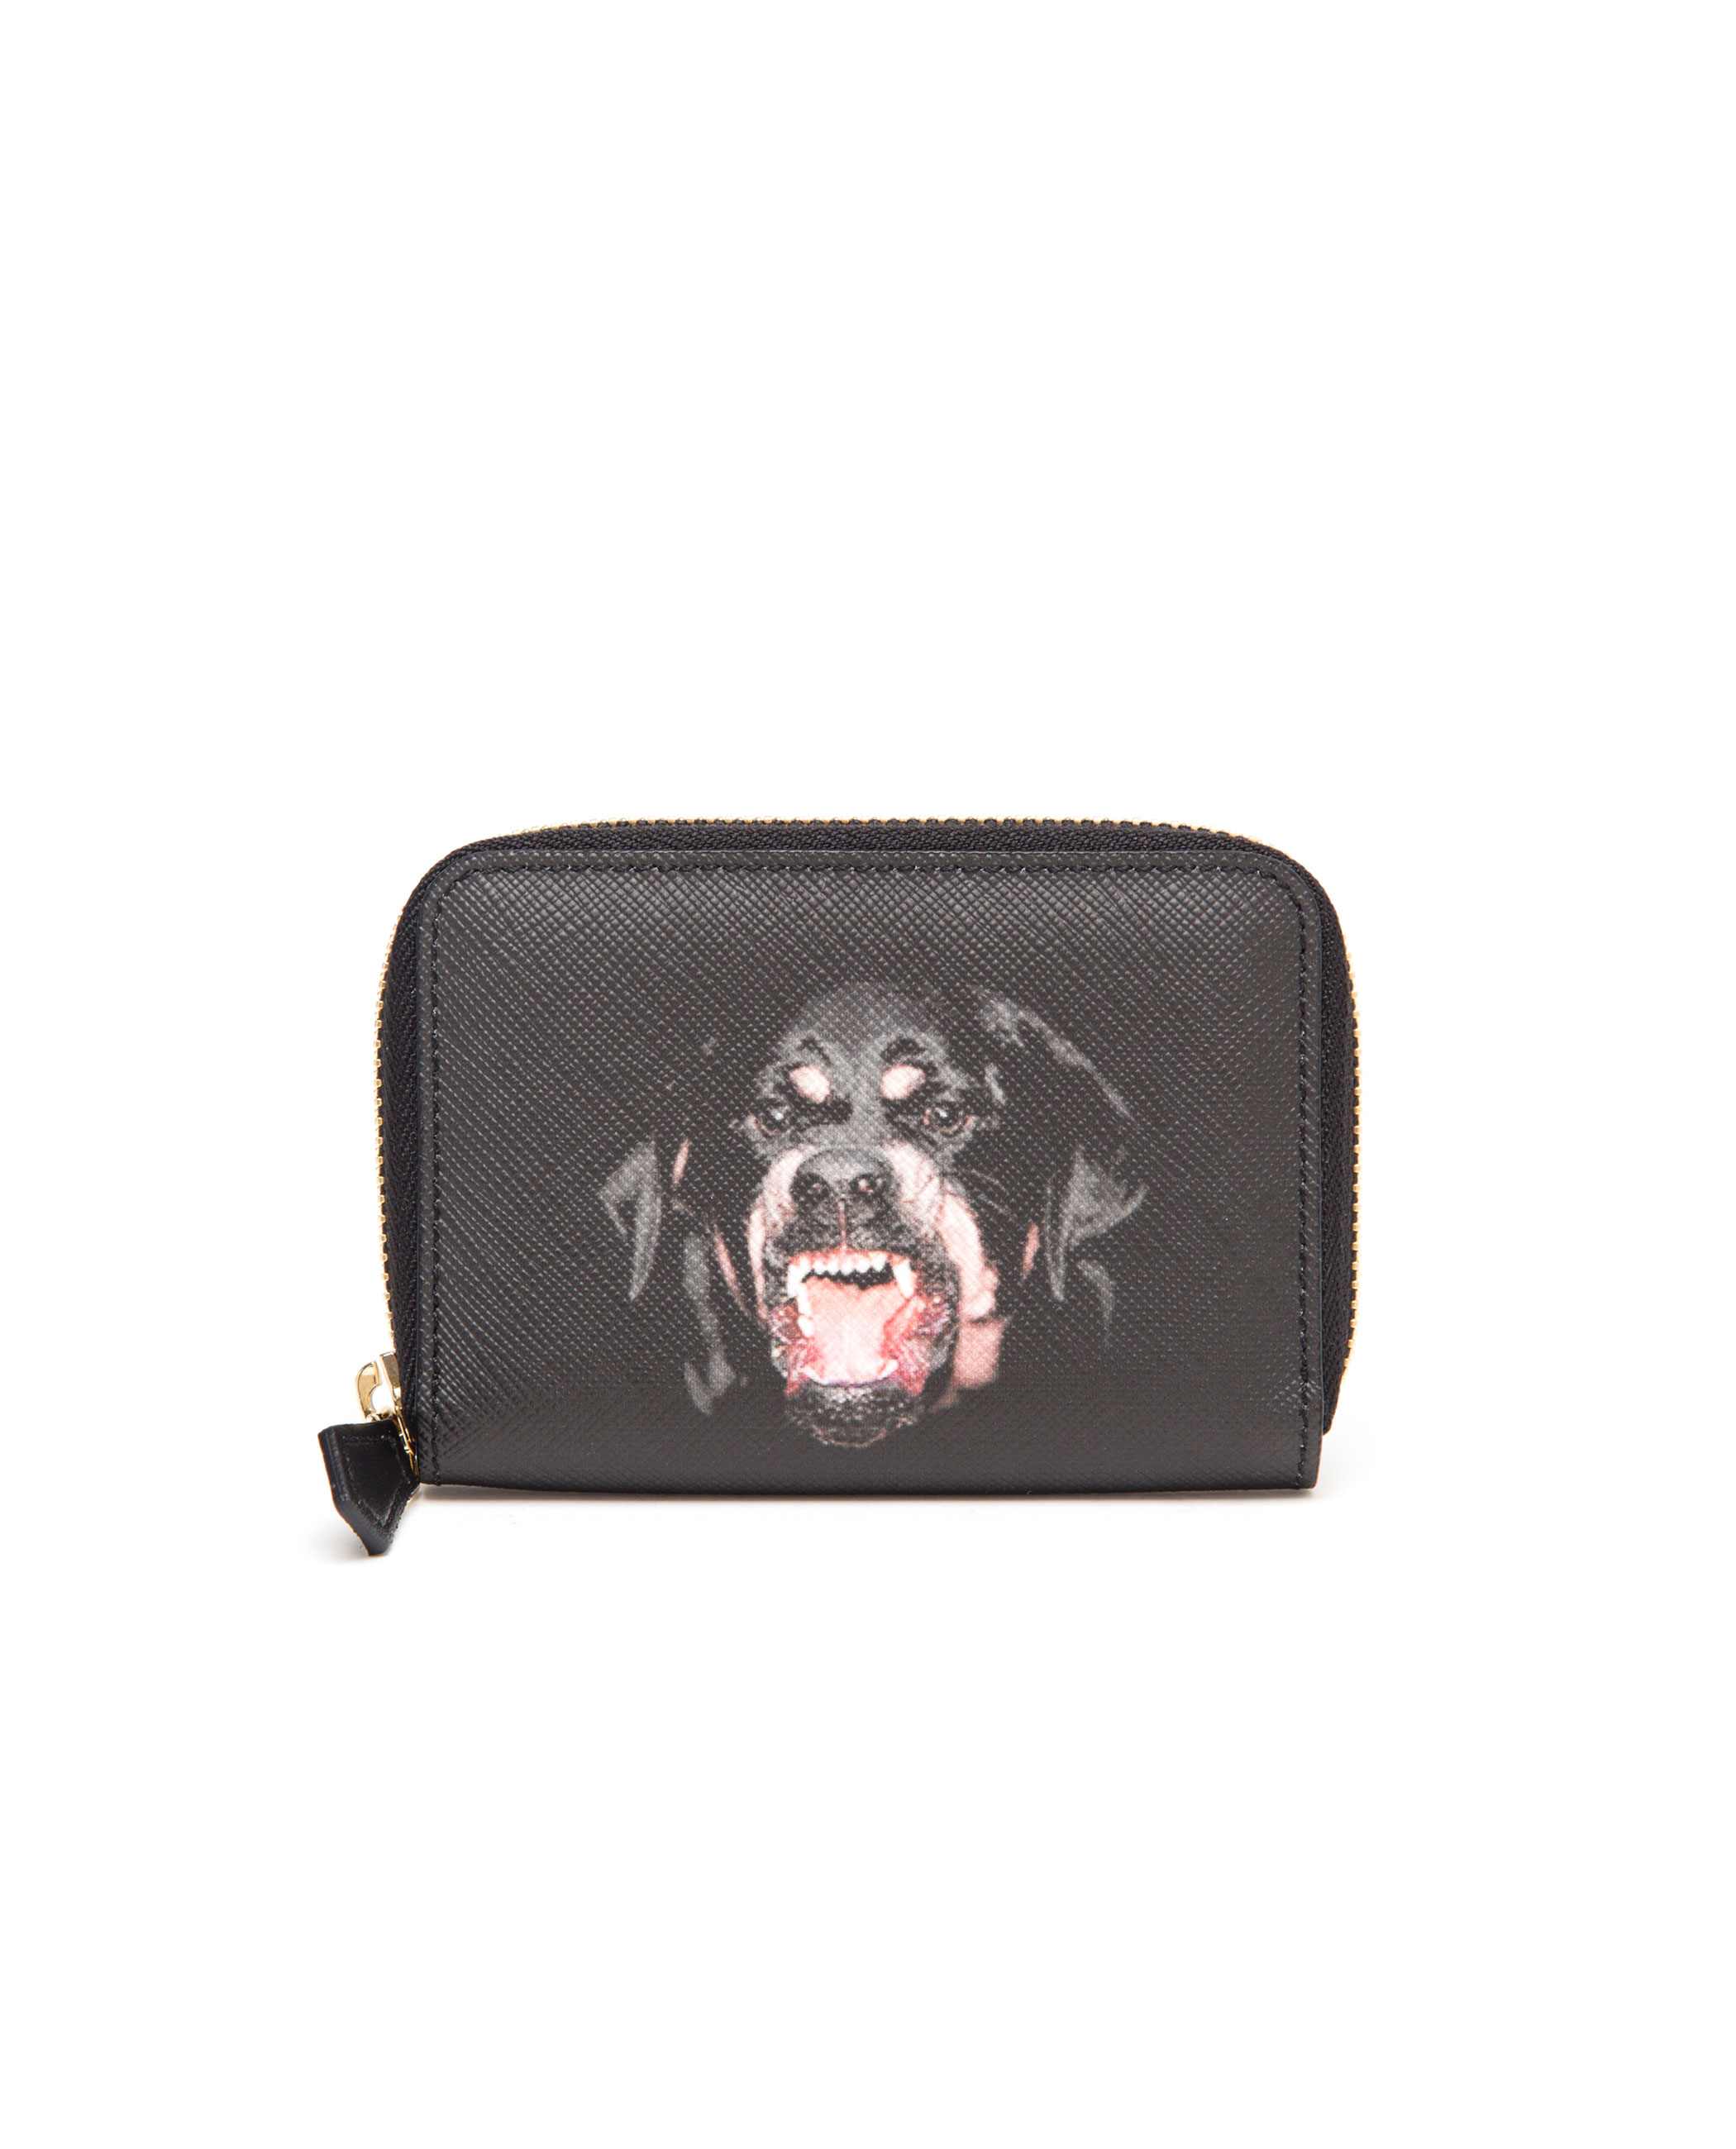 Givenchy Rottweiler Coin Purse in Black | Lyst